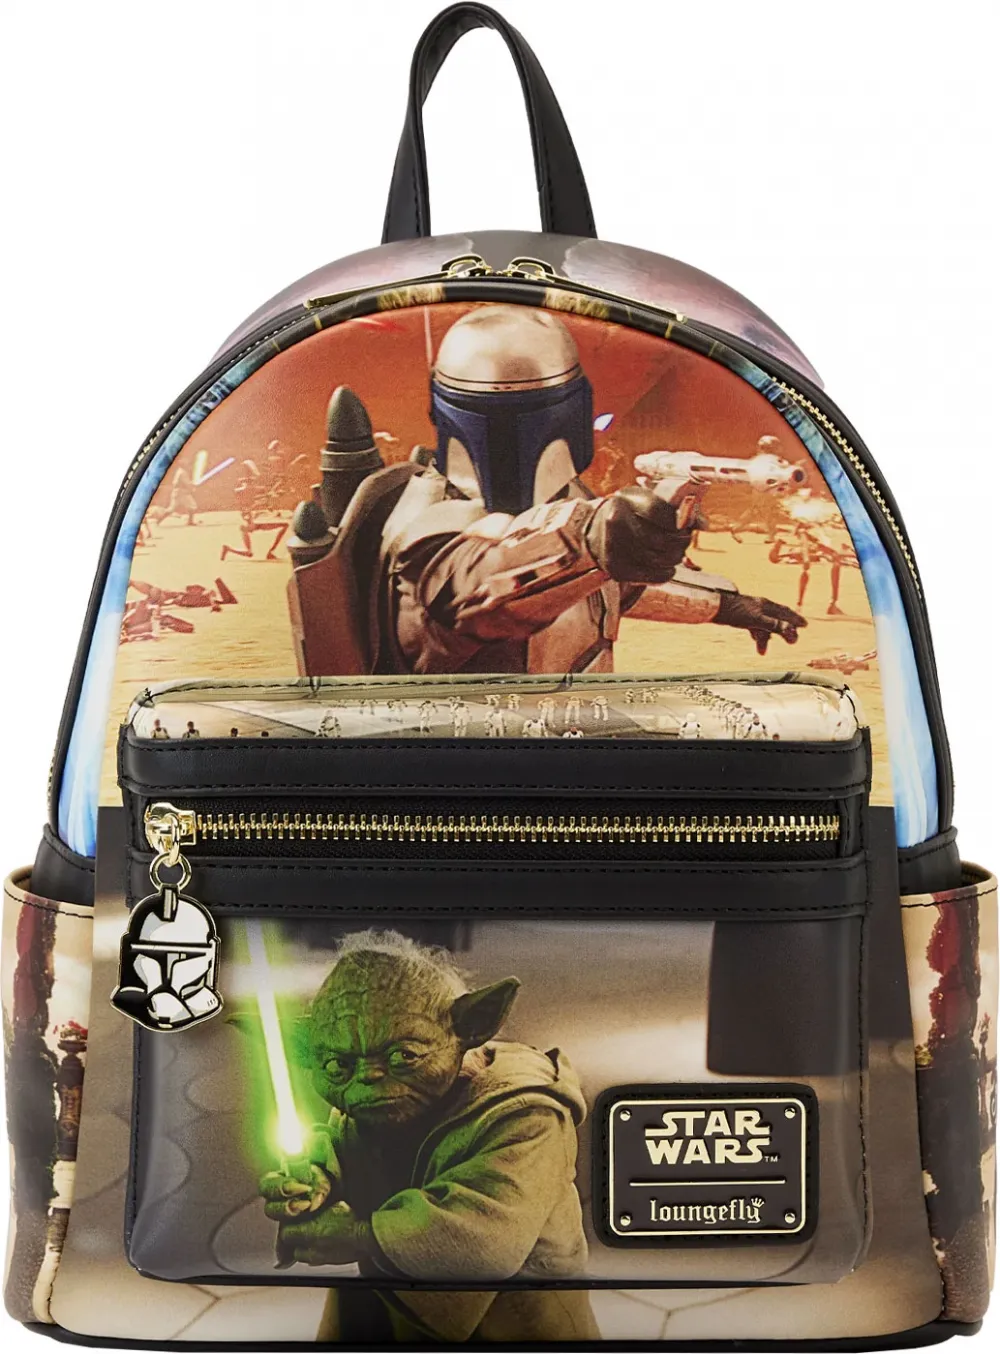 Star Wars Attack of the Clones Scenes Mini Backpack Loungefly